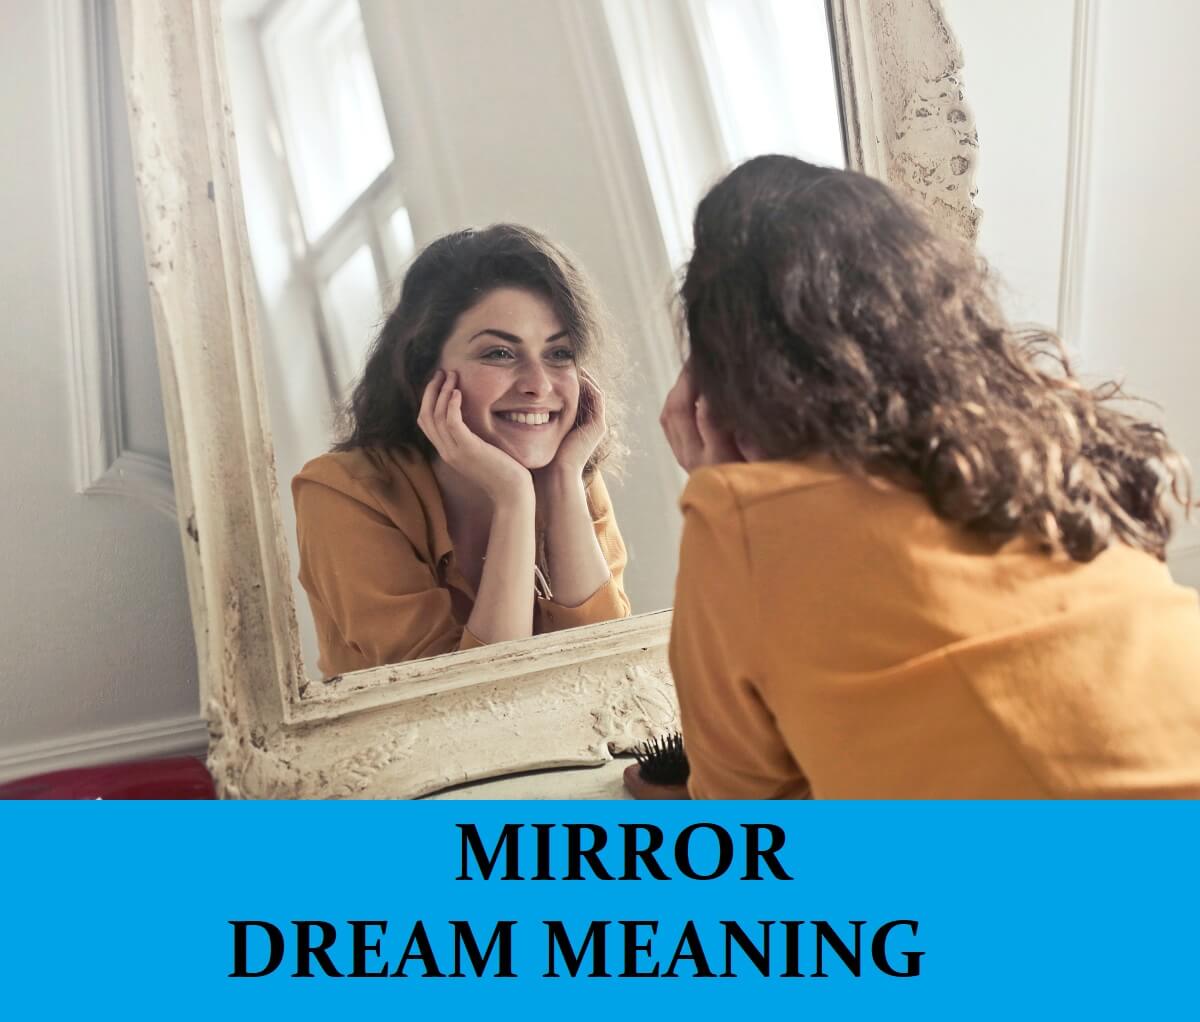 Mirror Dream Meaning Top 17 Dreams, What Does A Broken Mirror In Dream Mean